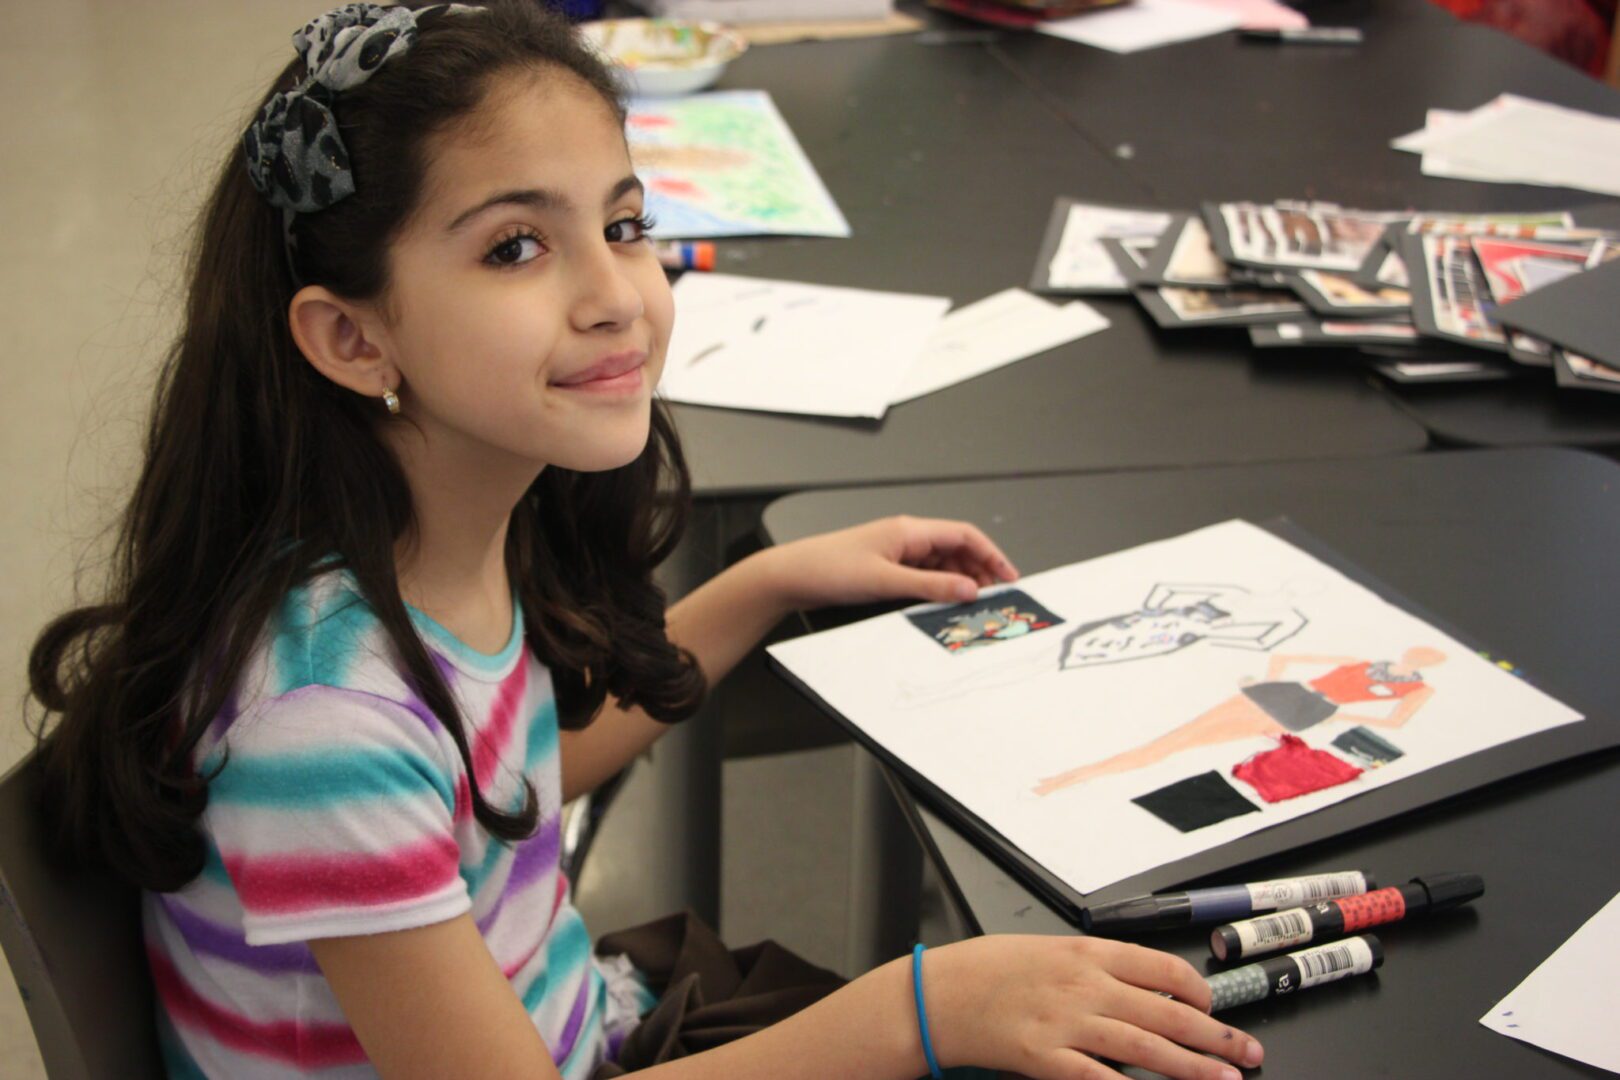 A young girl sitting at a table drawing a picture.